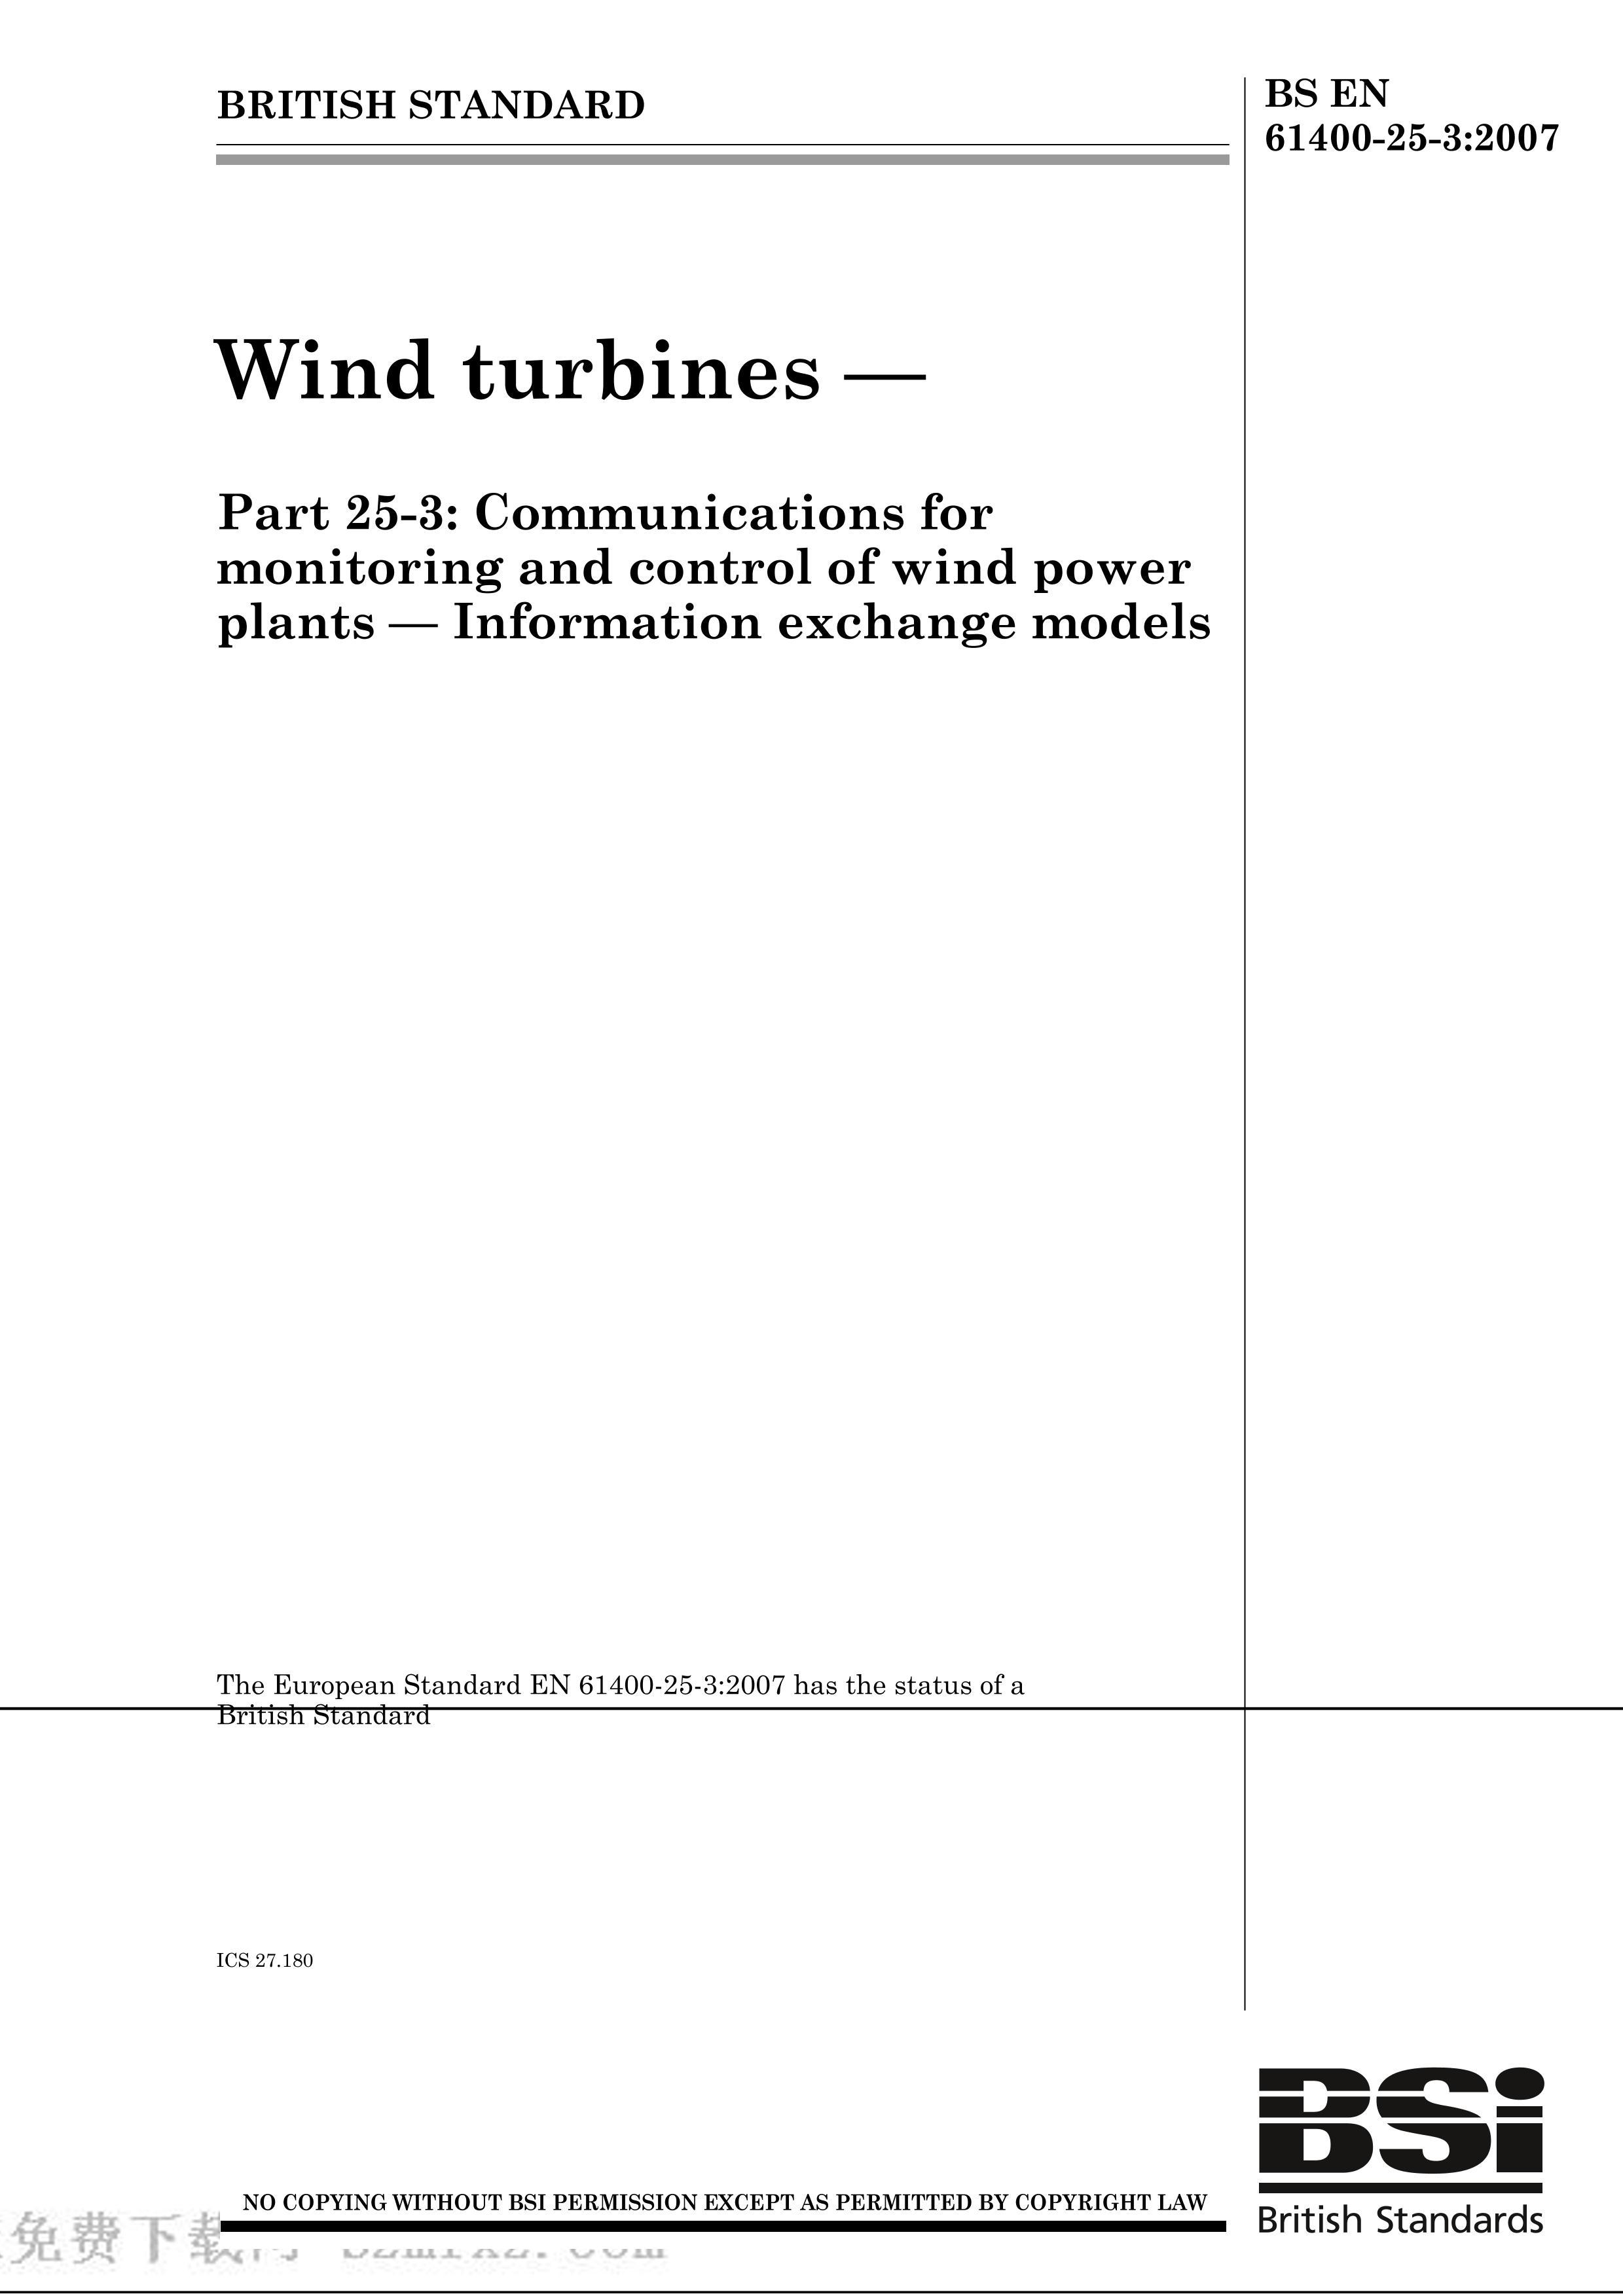 BS EN 61400-25-3-2007 Wind turbines. Communications for monitoring and control of wind power plants. Information exchange models.pdf1ҳ